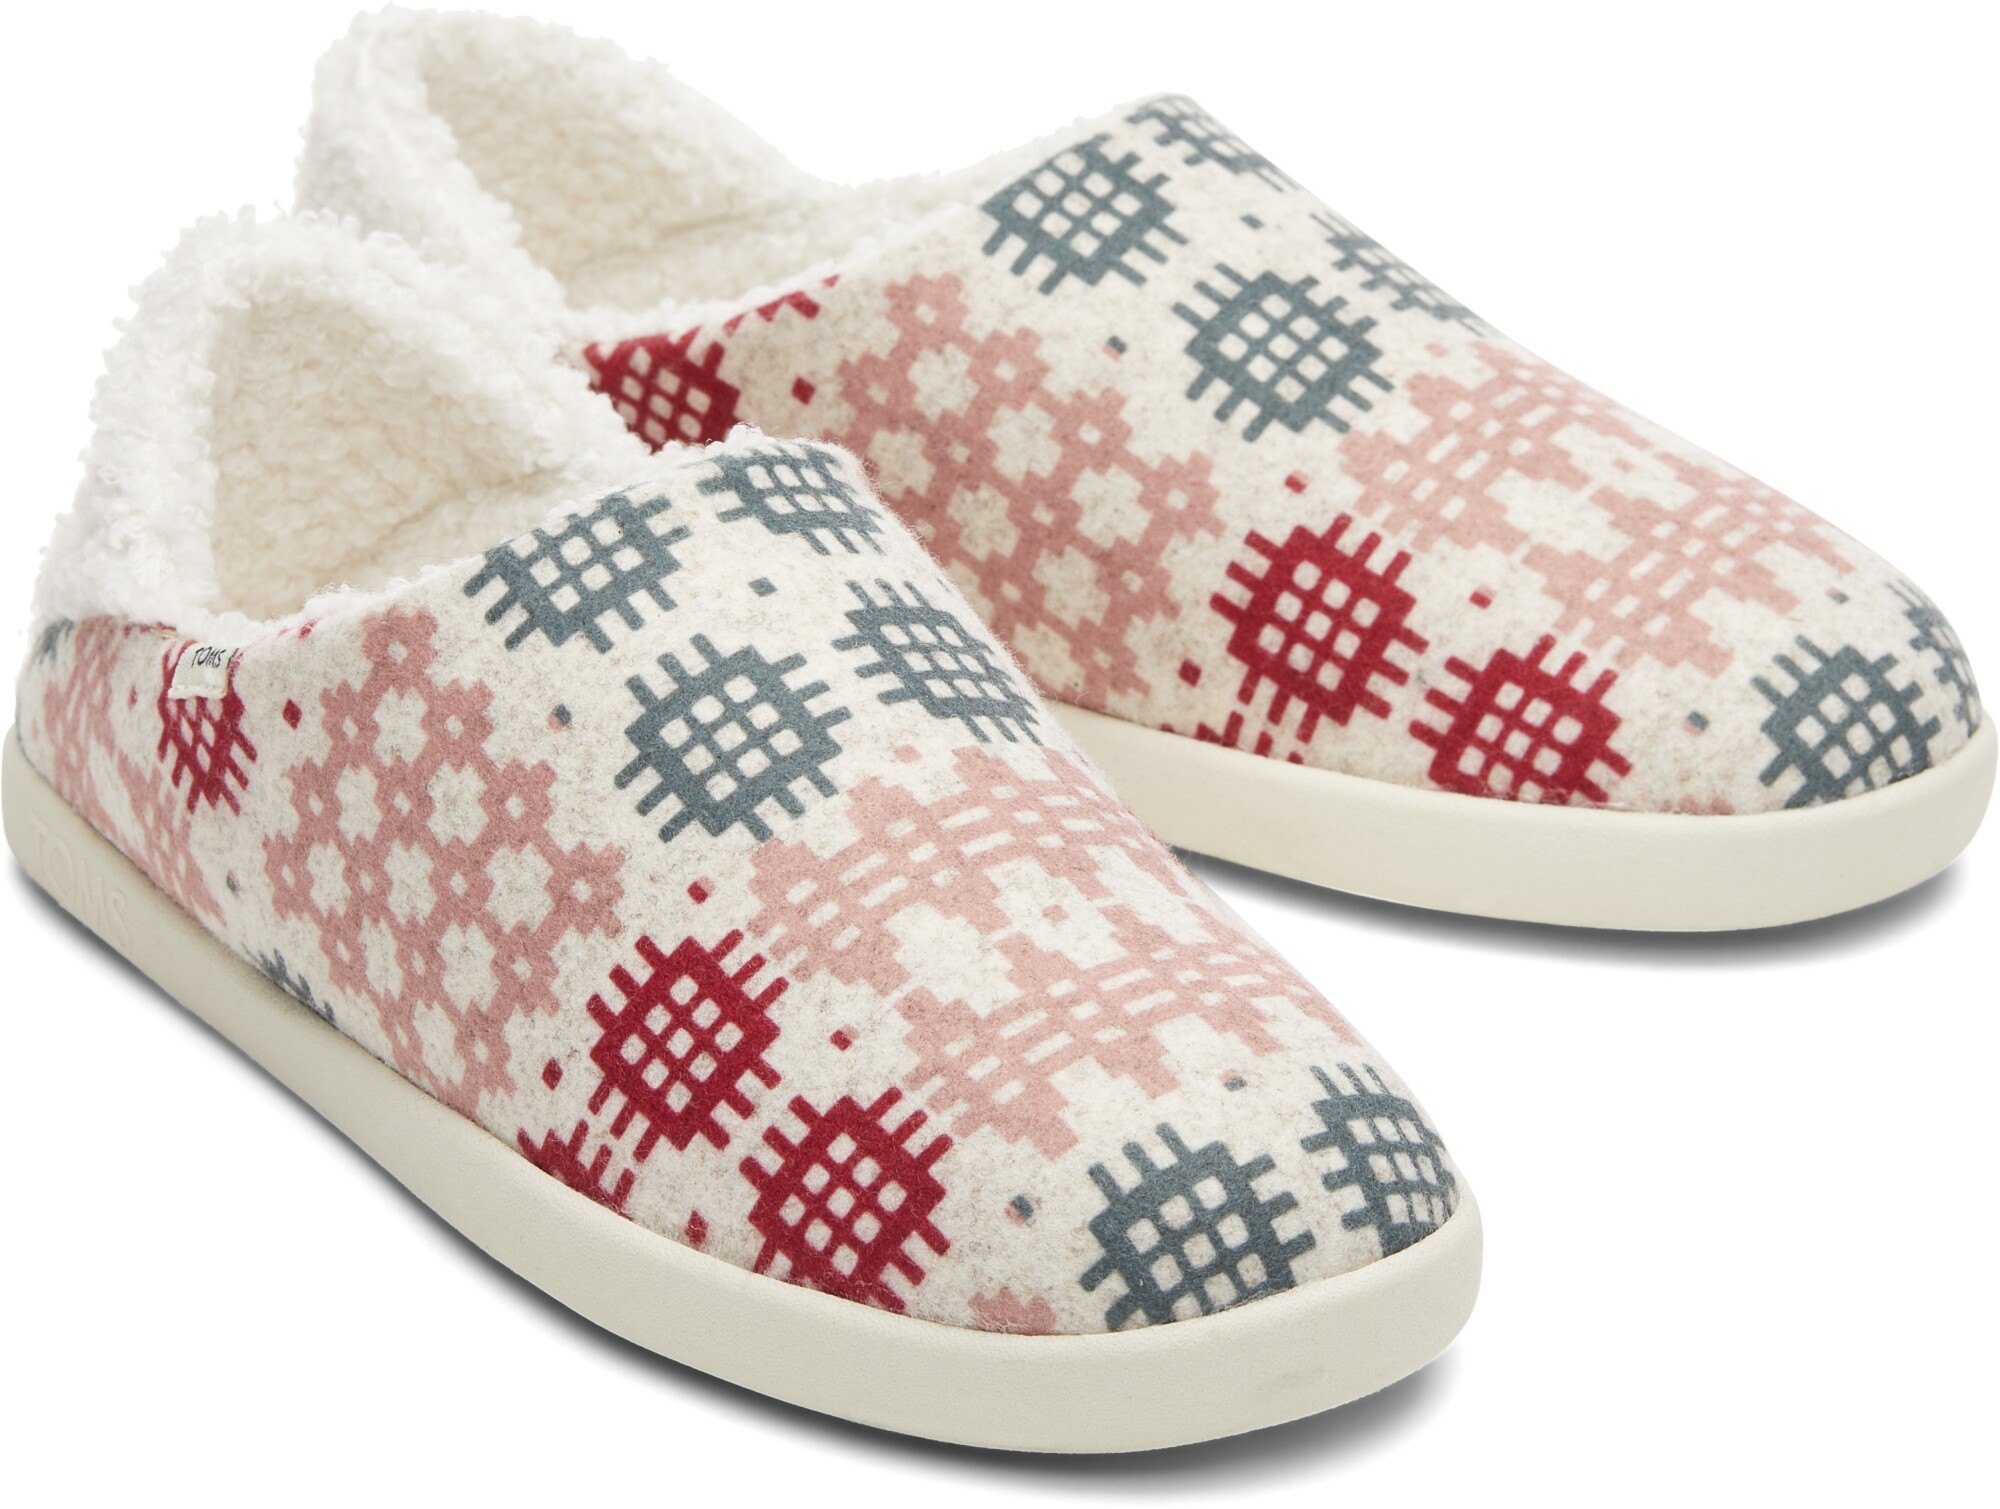 Fleece-lined slip-on footwear with a colorful pattern